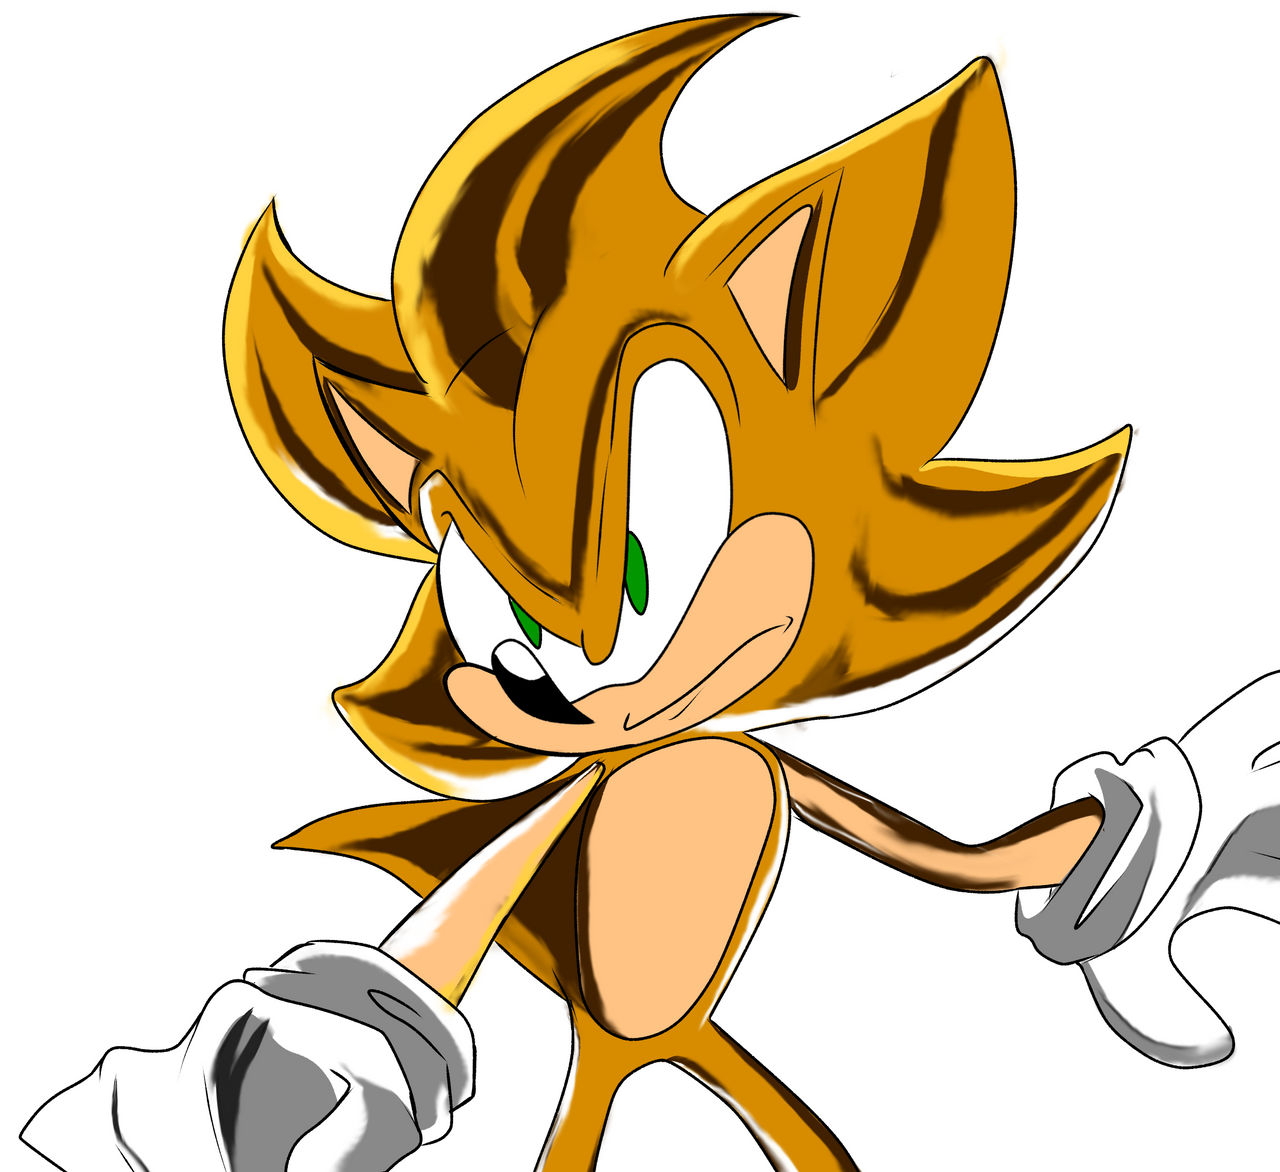 Super Sonic in Sonic 1 Prototype style by ThomasTheHedgehog888 on DeviantArt